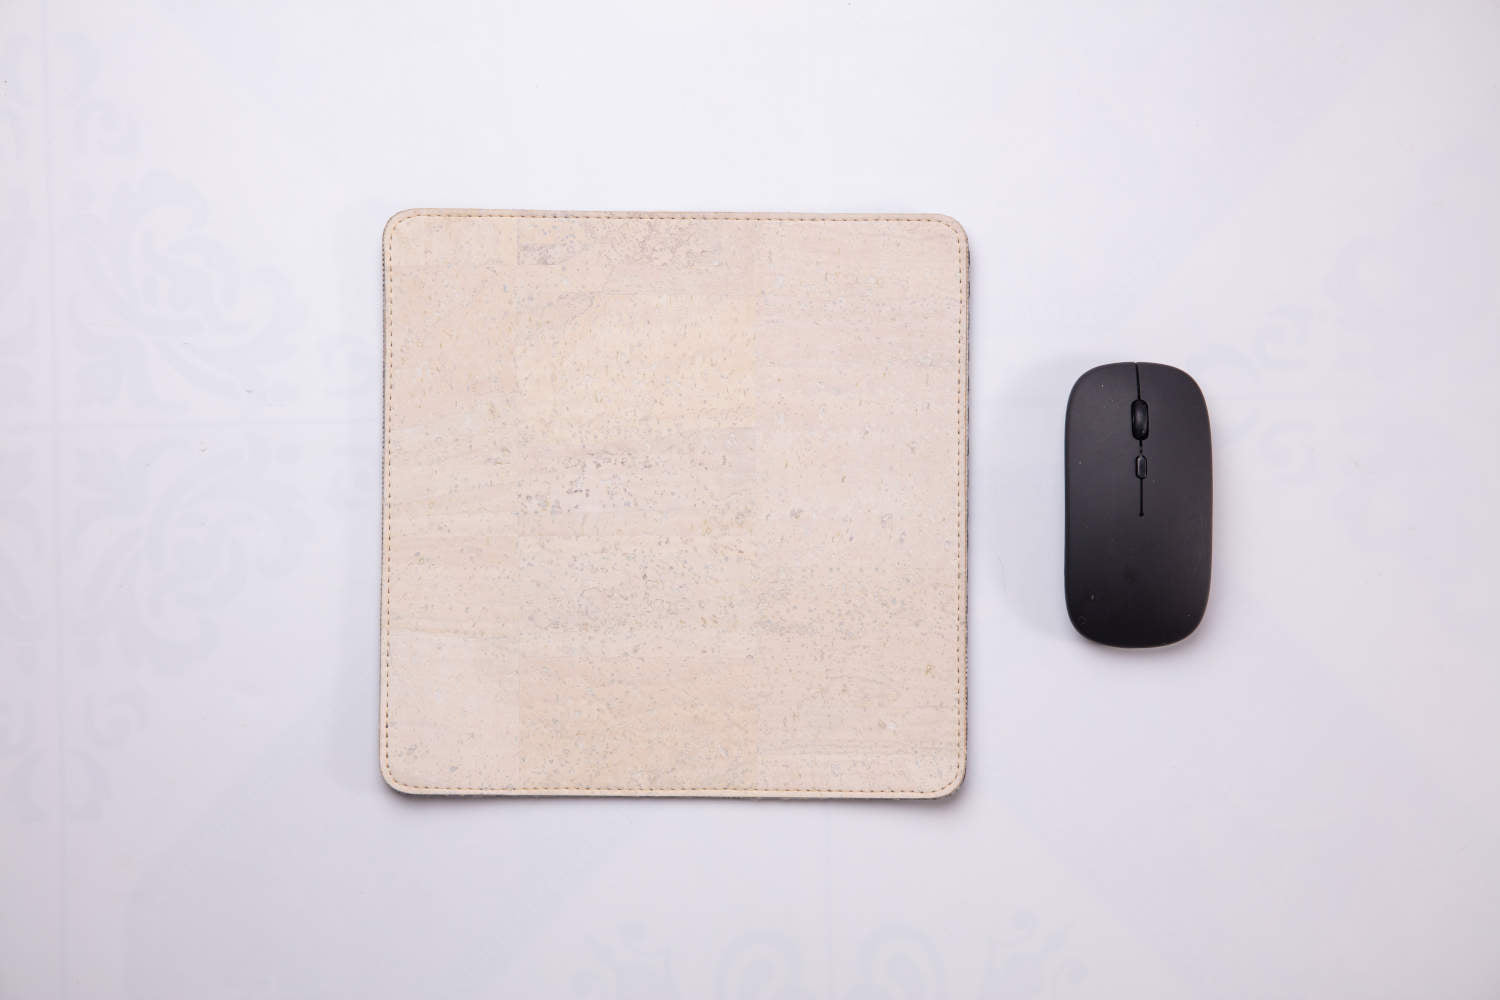 White travel mousepad with wireless mouse next to it